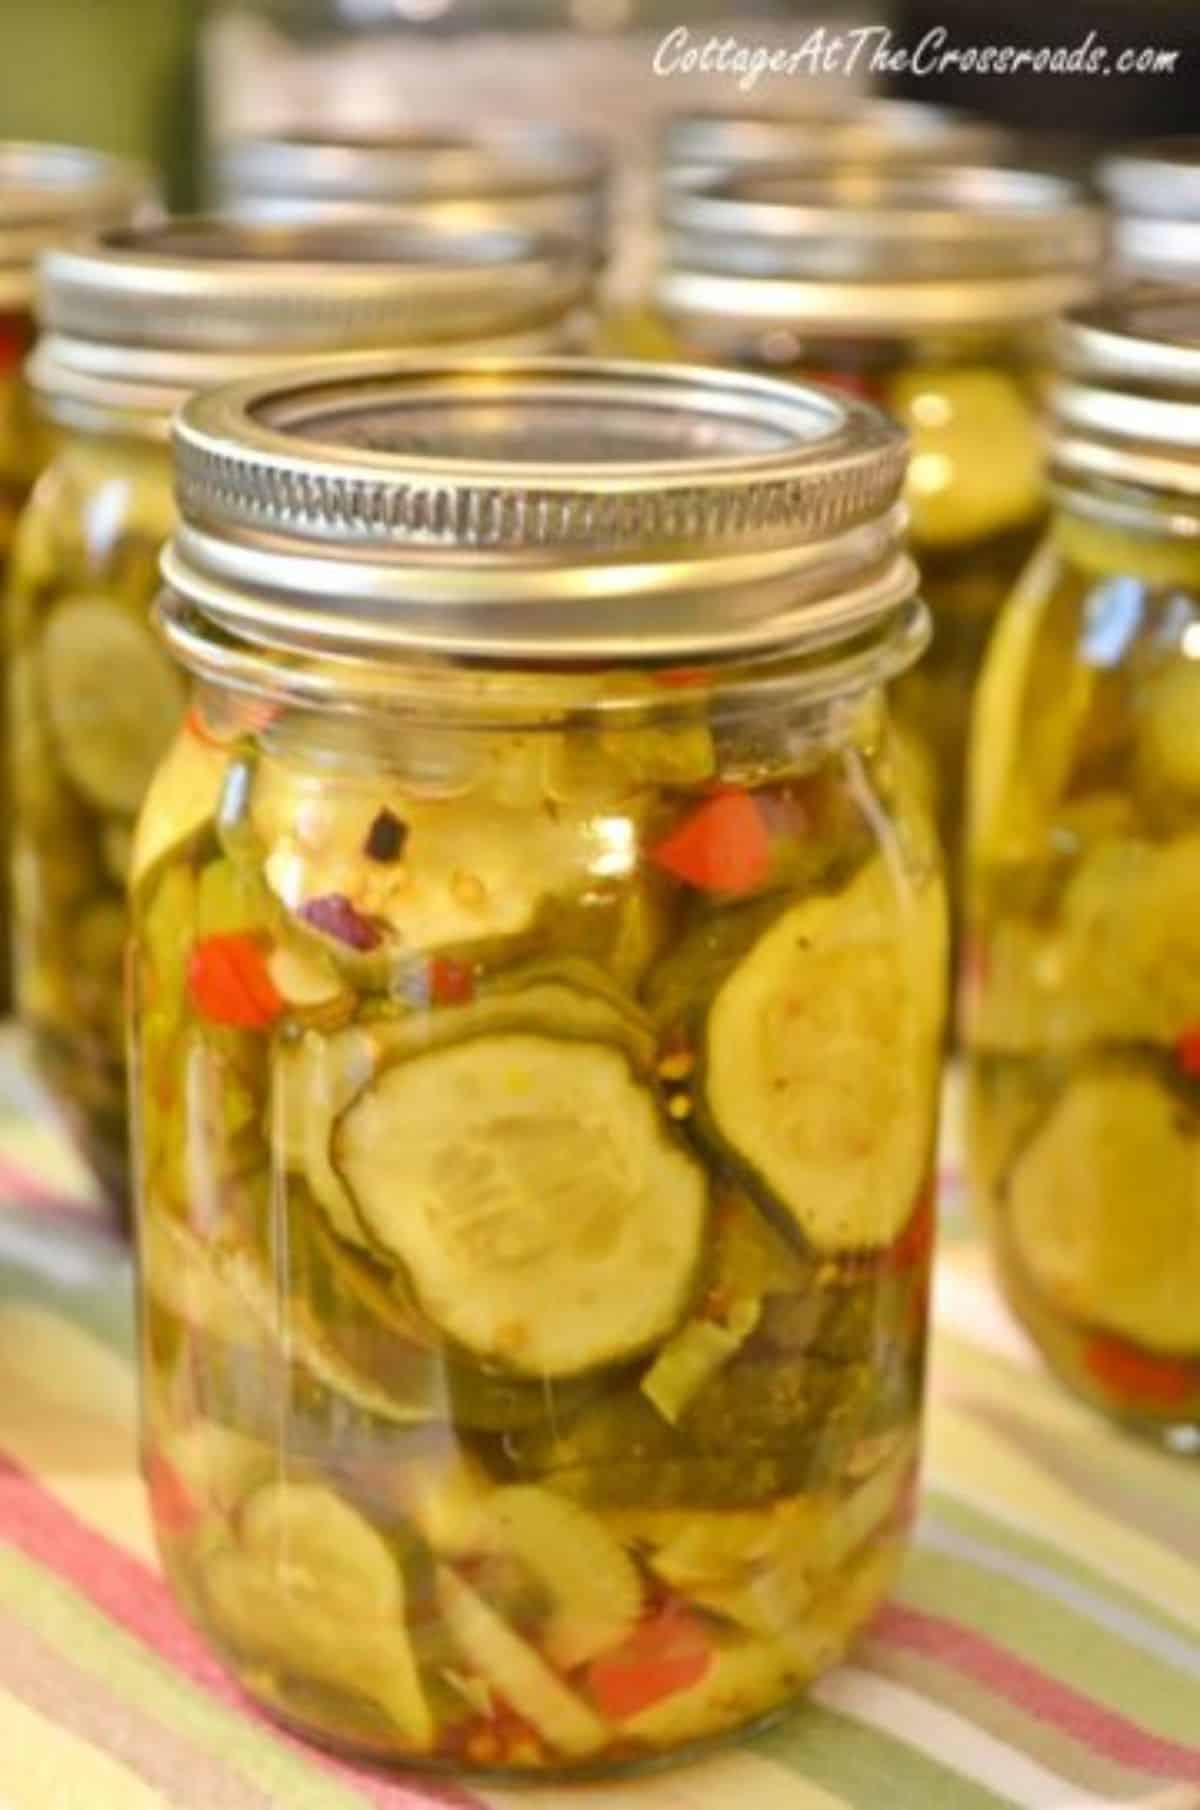 Zesty bread and butter pickles in glass jars.